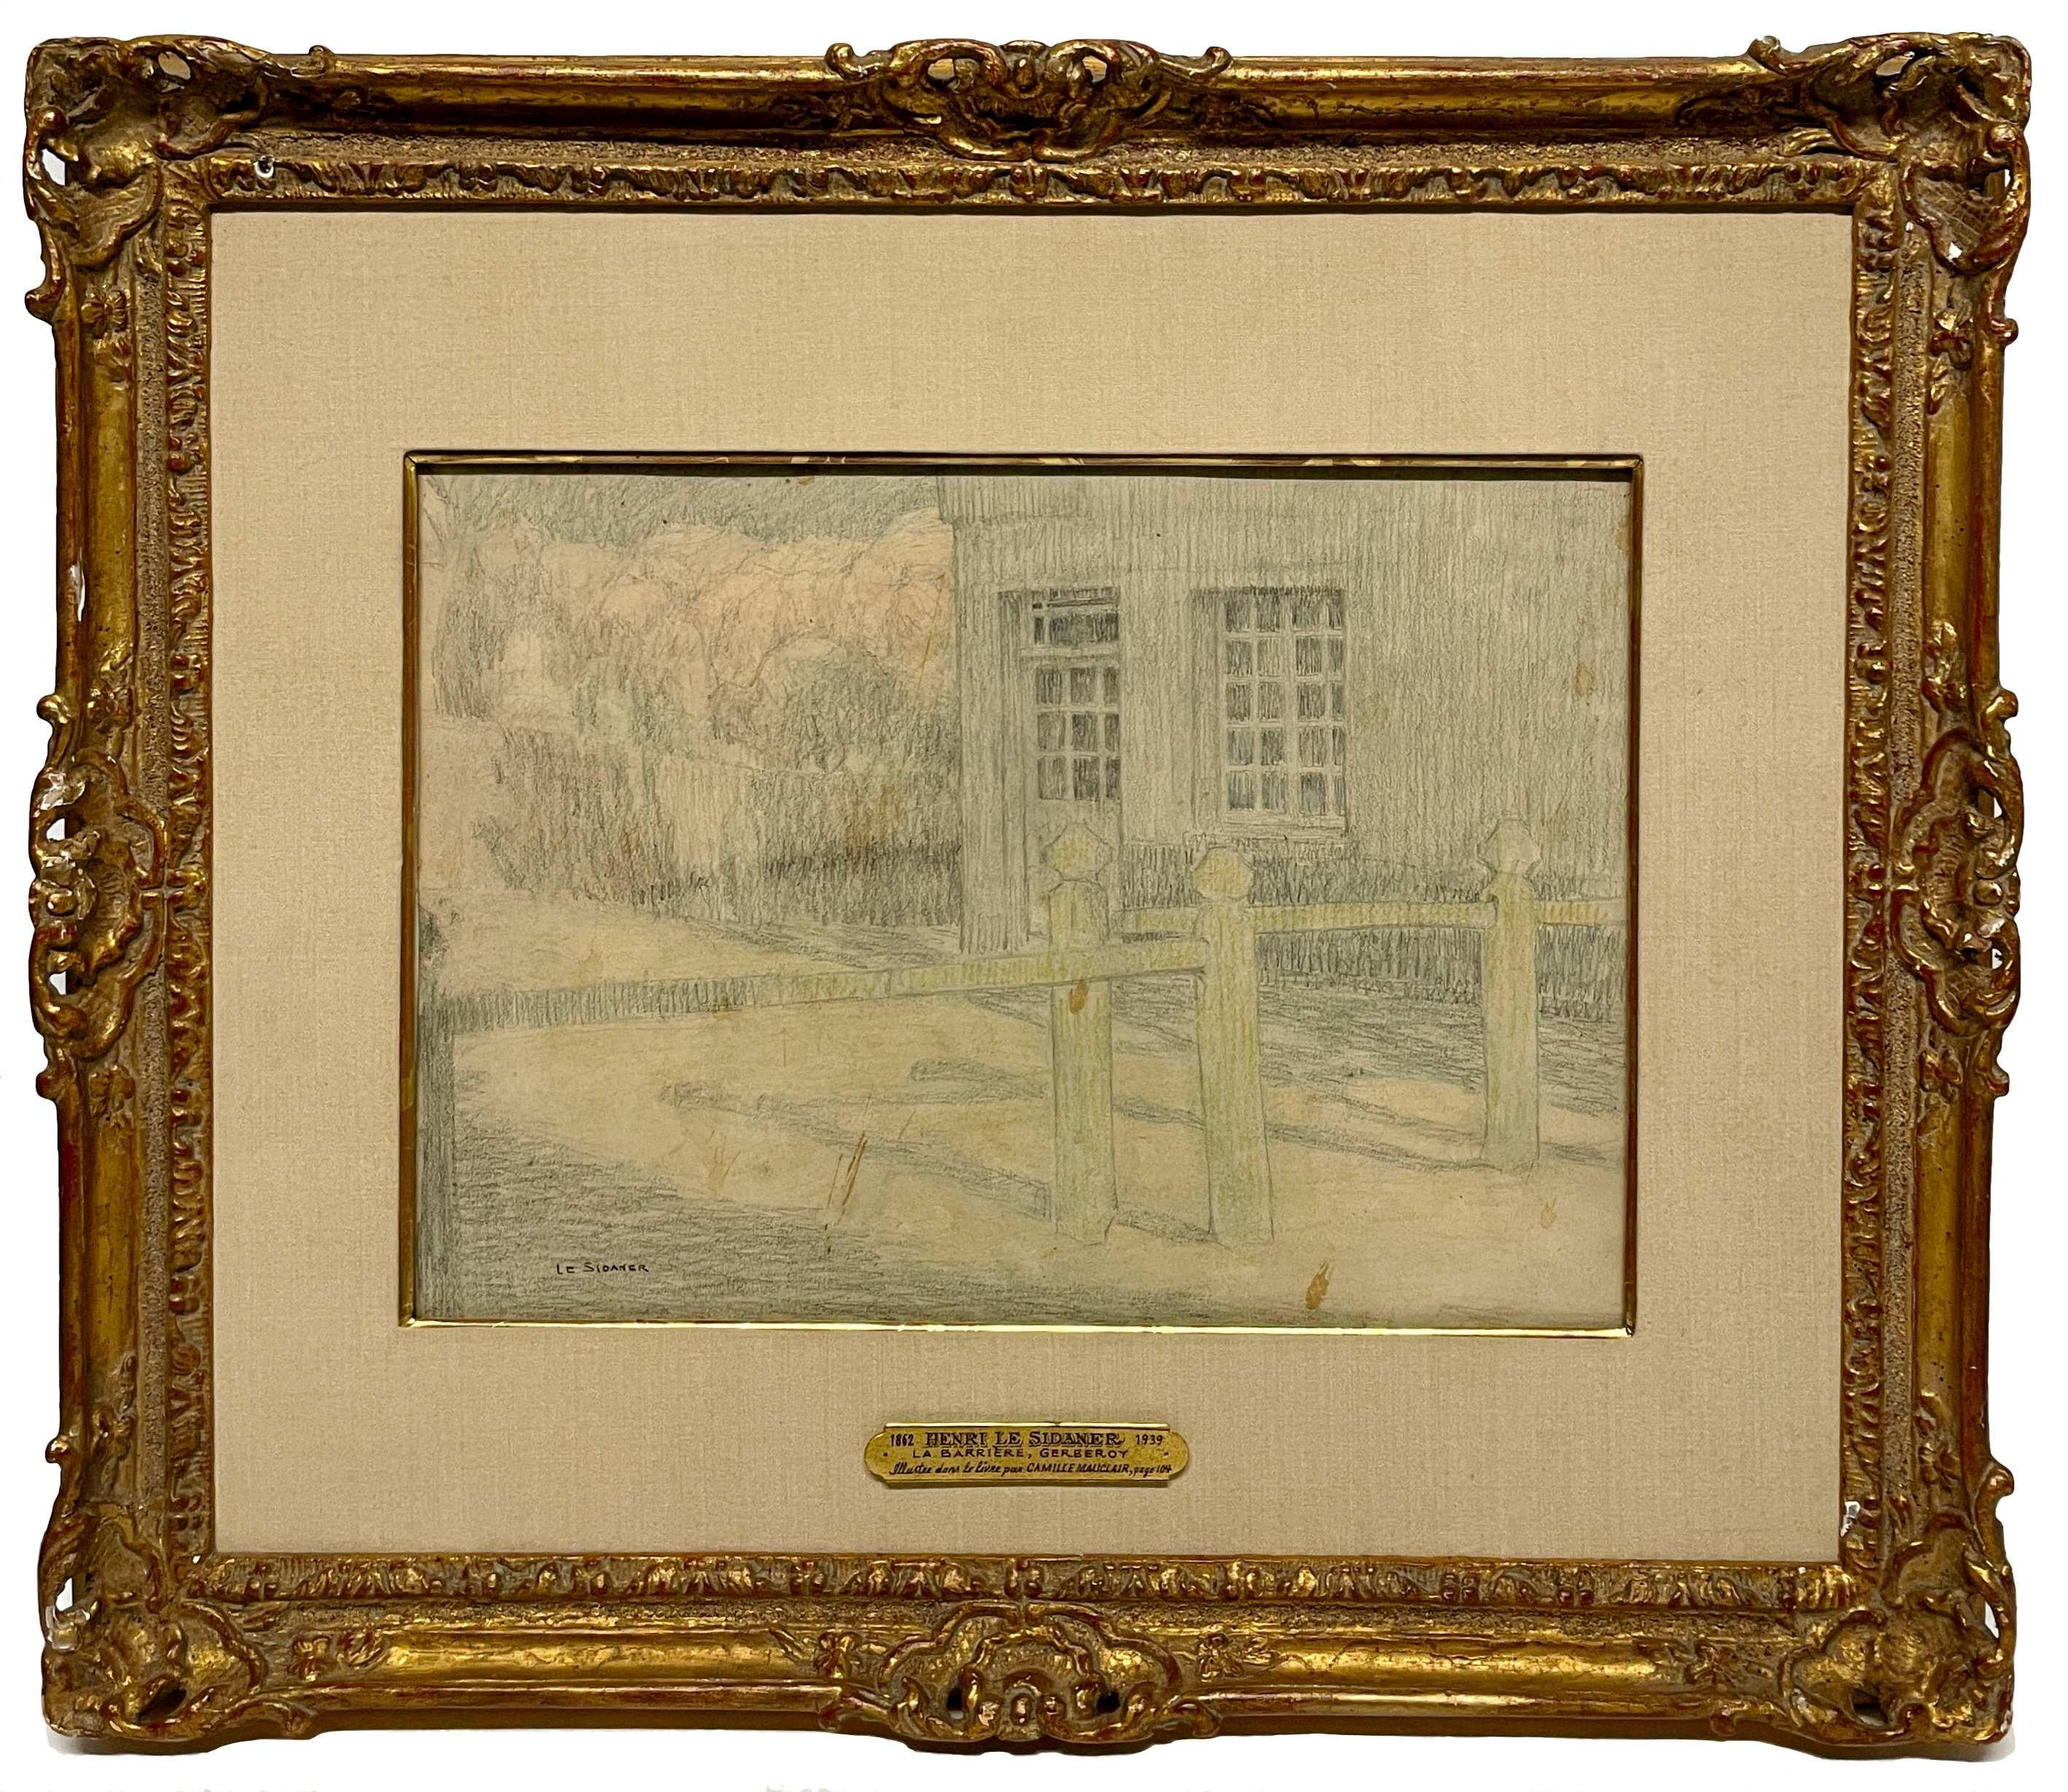 A Graphite & Colored PencDrawing by Henri Le Sidaner, 